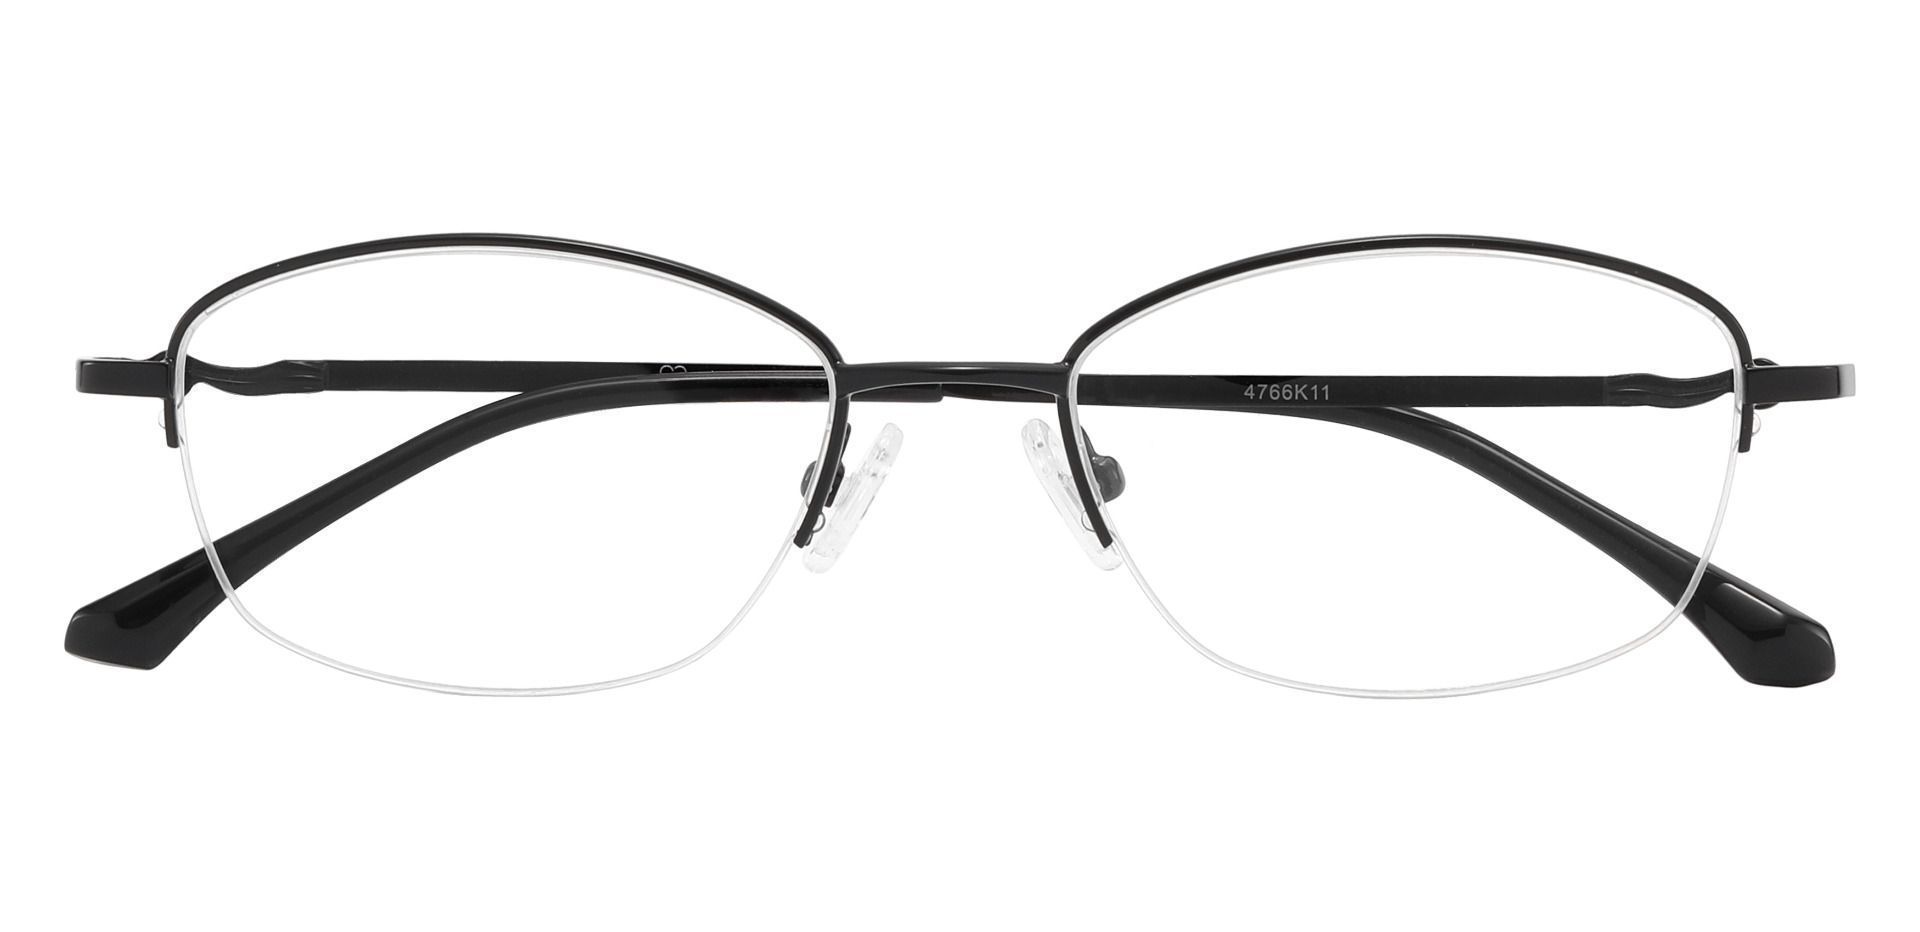 Beulah Oval Reading Glasses - Black